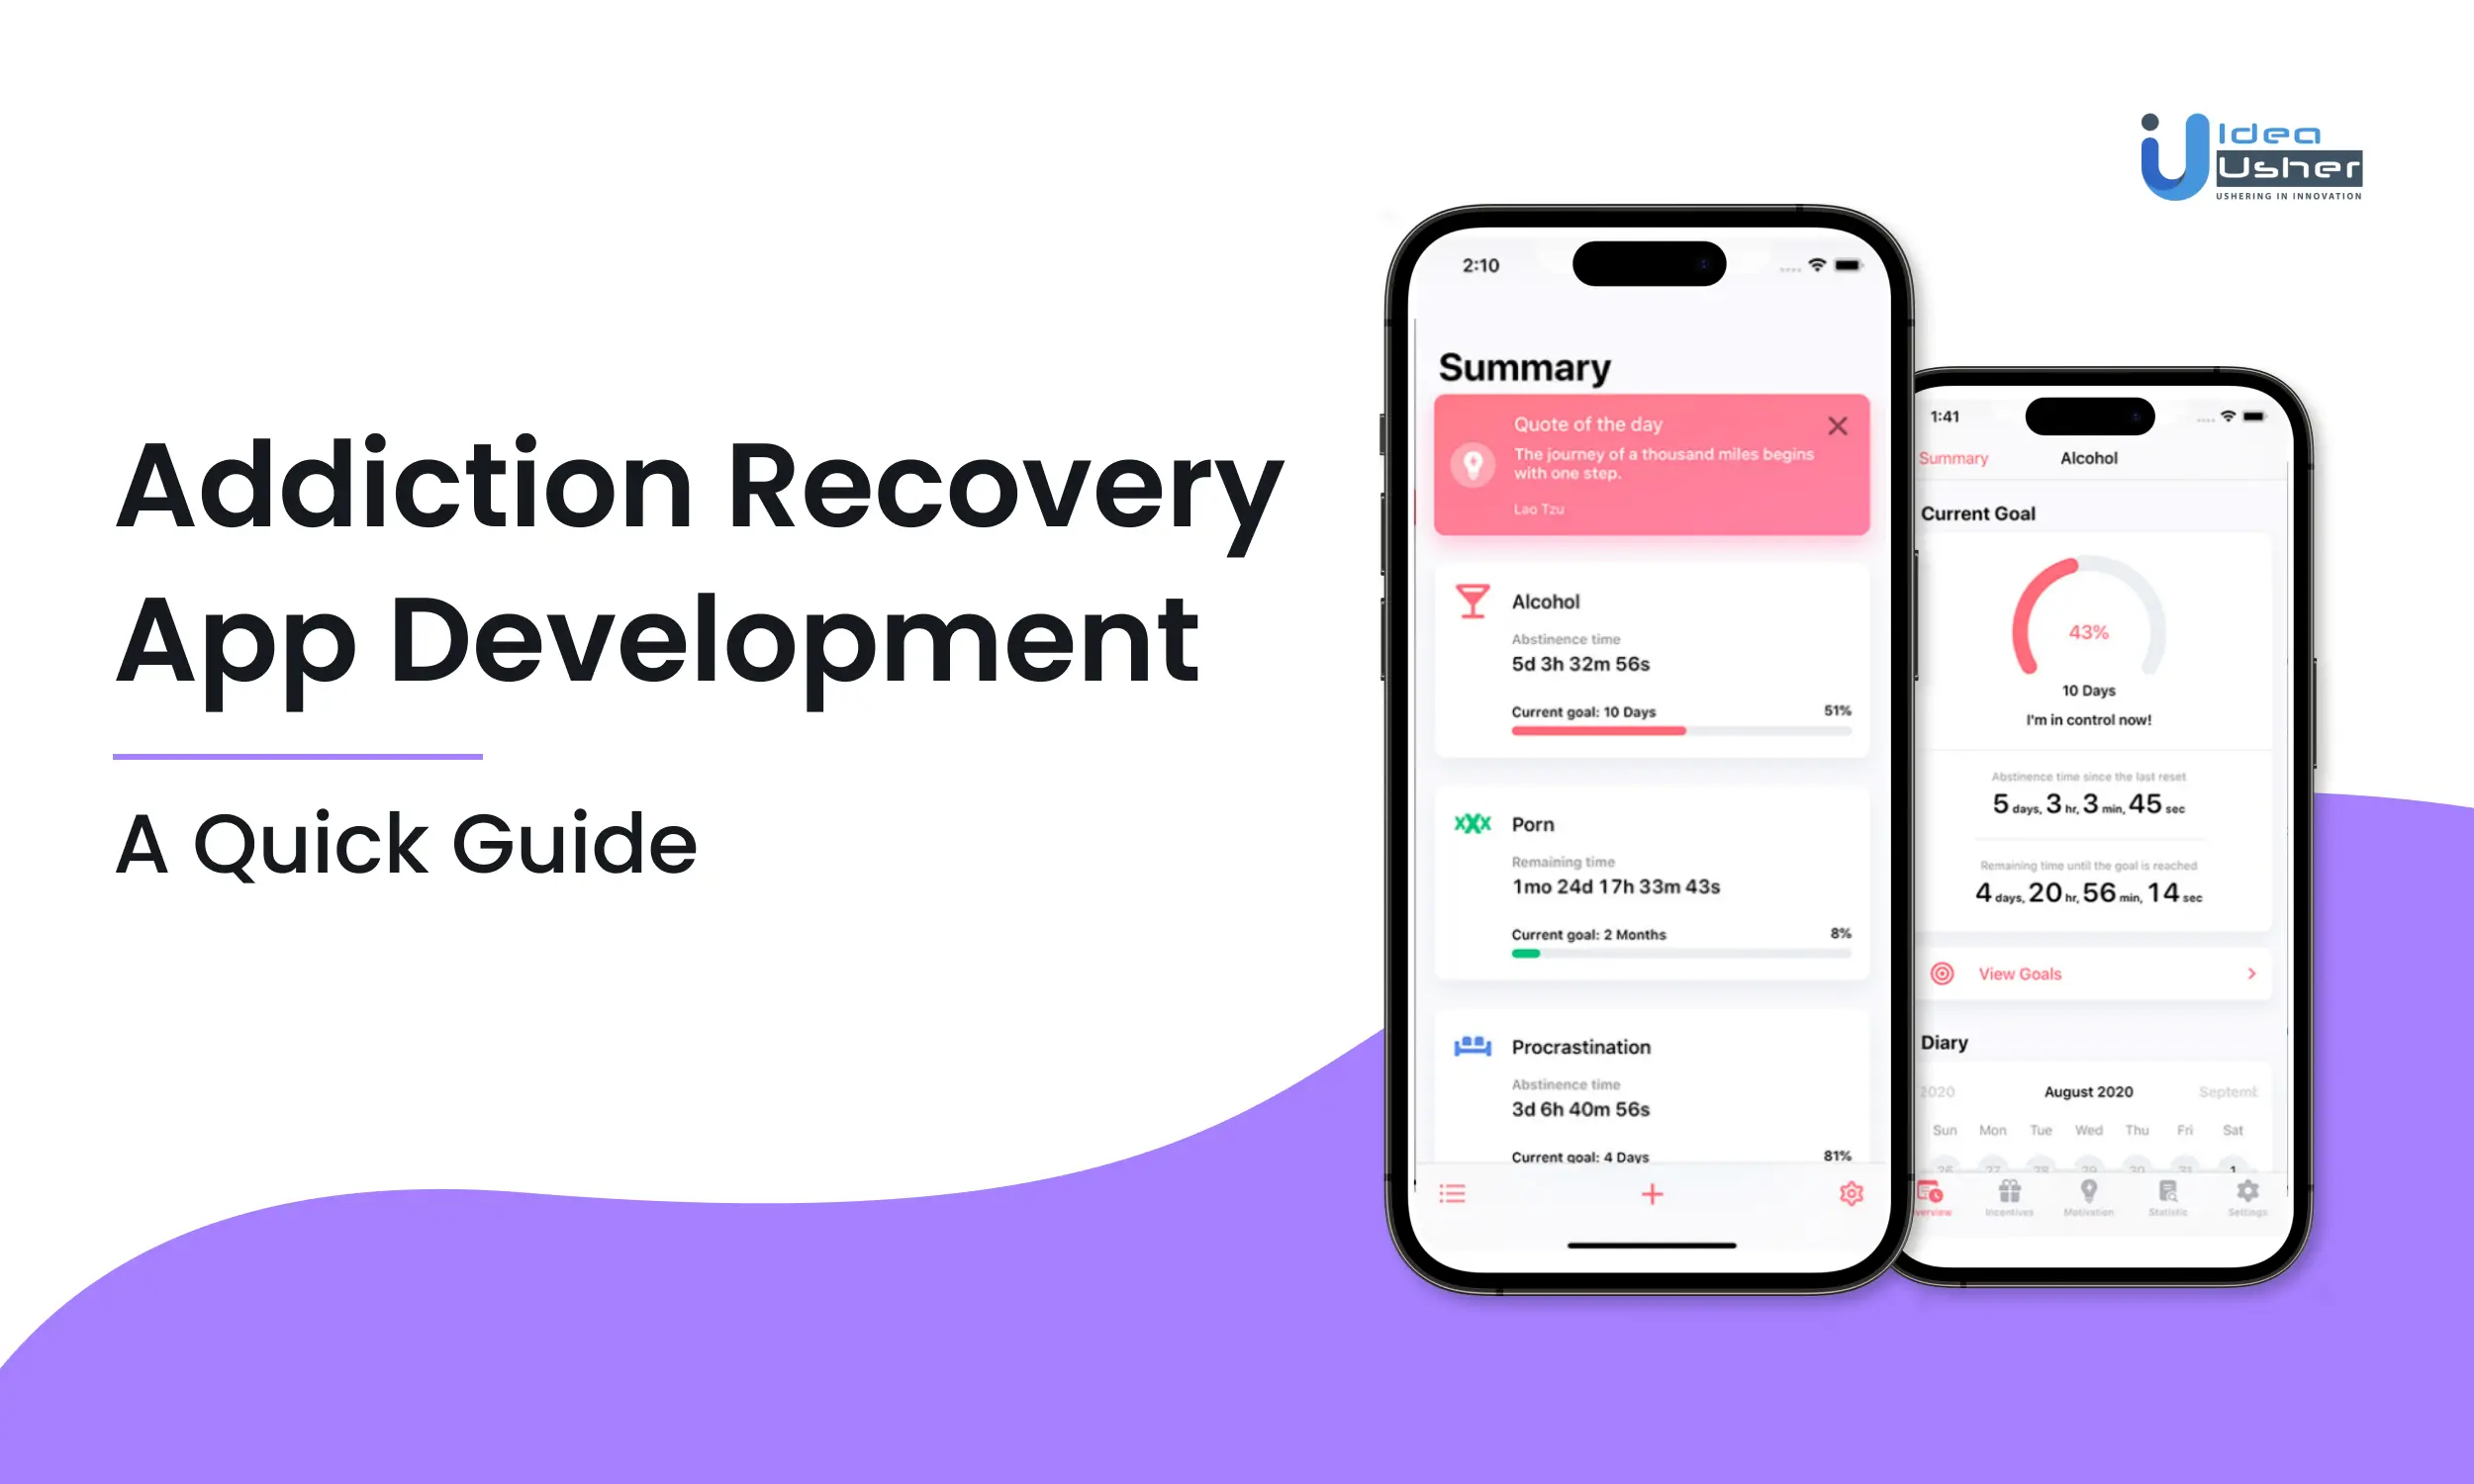 Addiction Recovery App Development: A Quick Guide